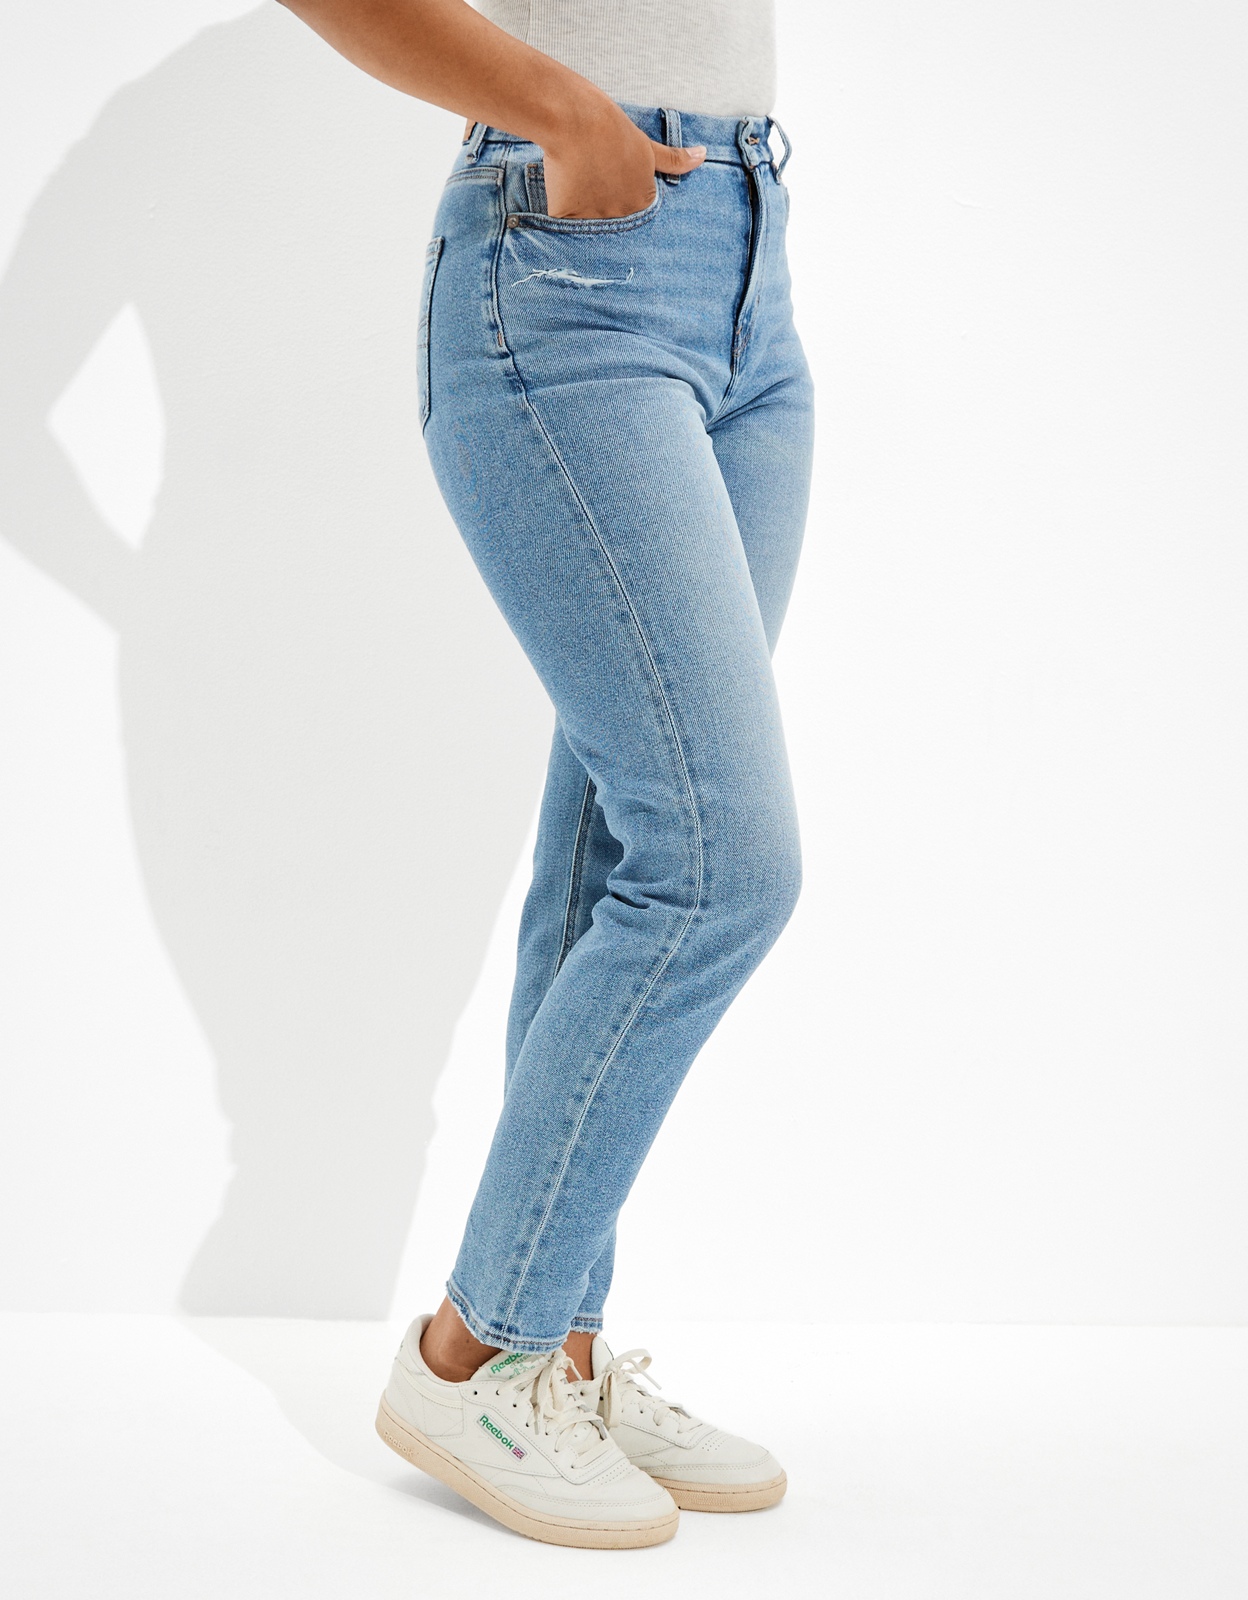 Shop AE Stretch Curvy Mom Jean online | American Eagle Outfitters